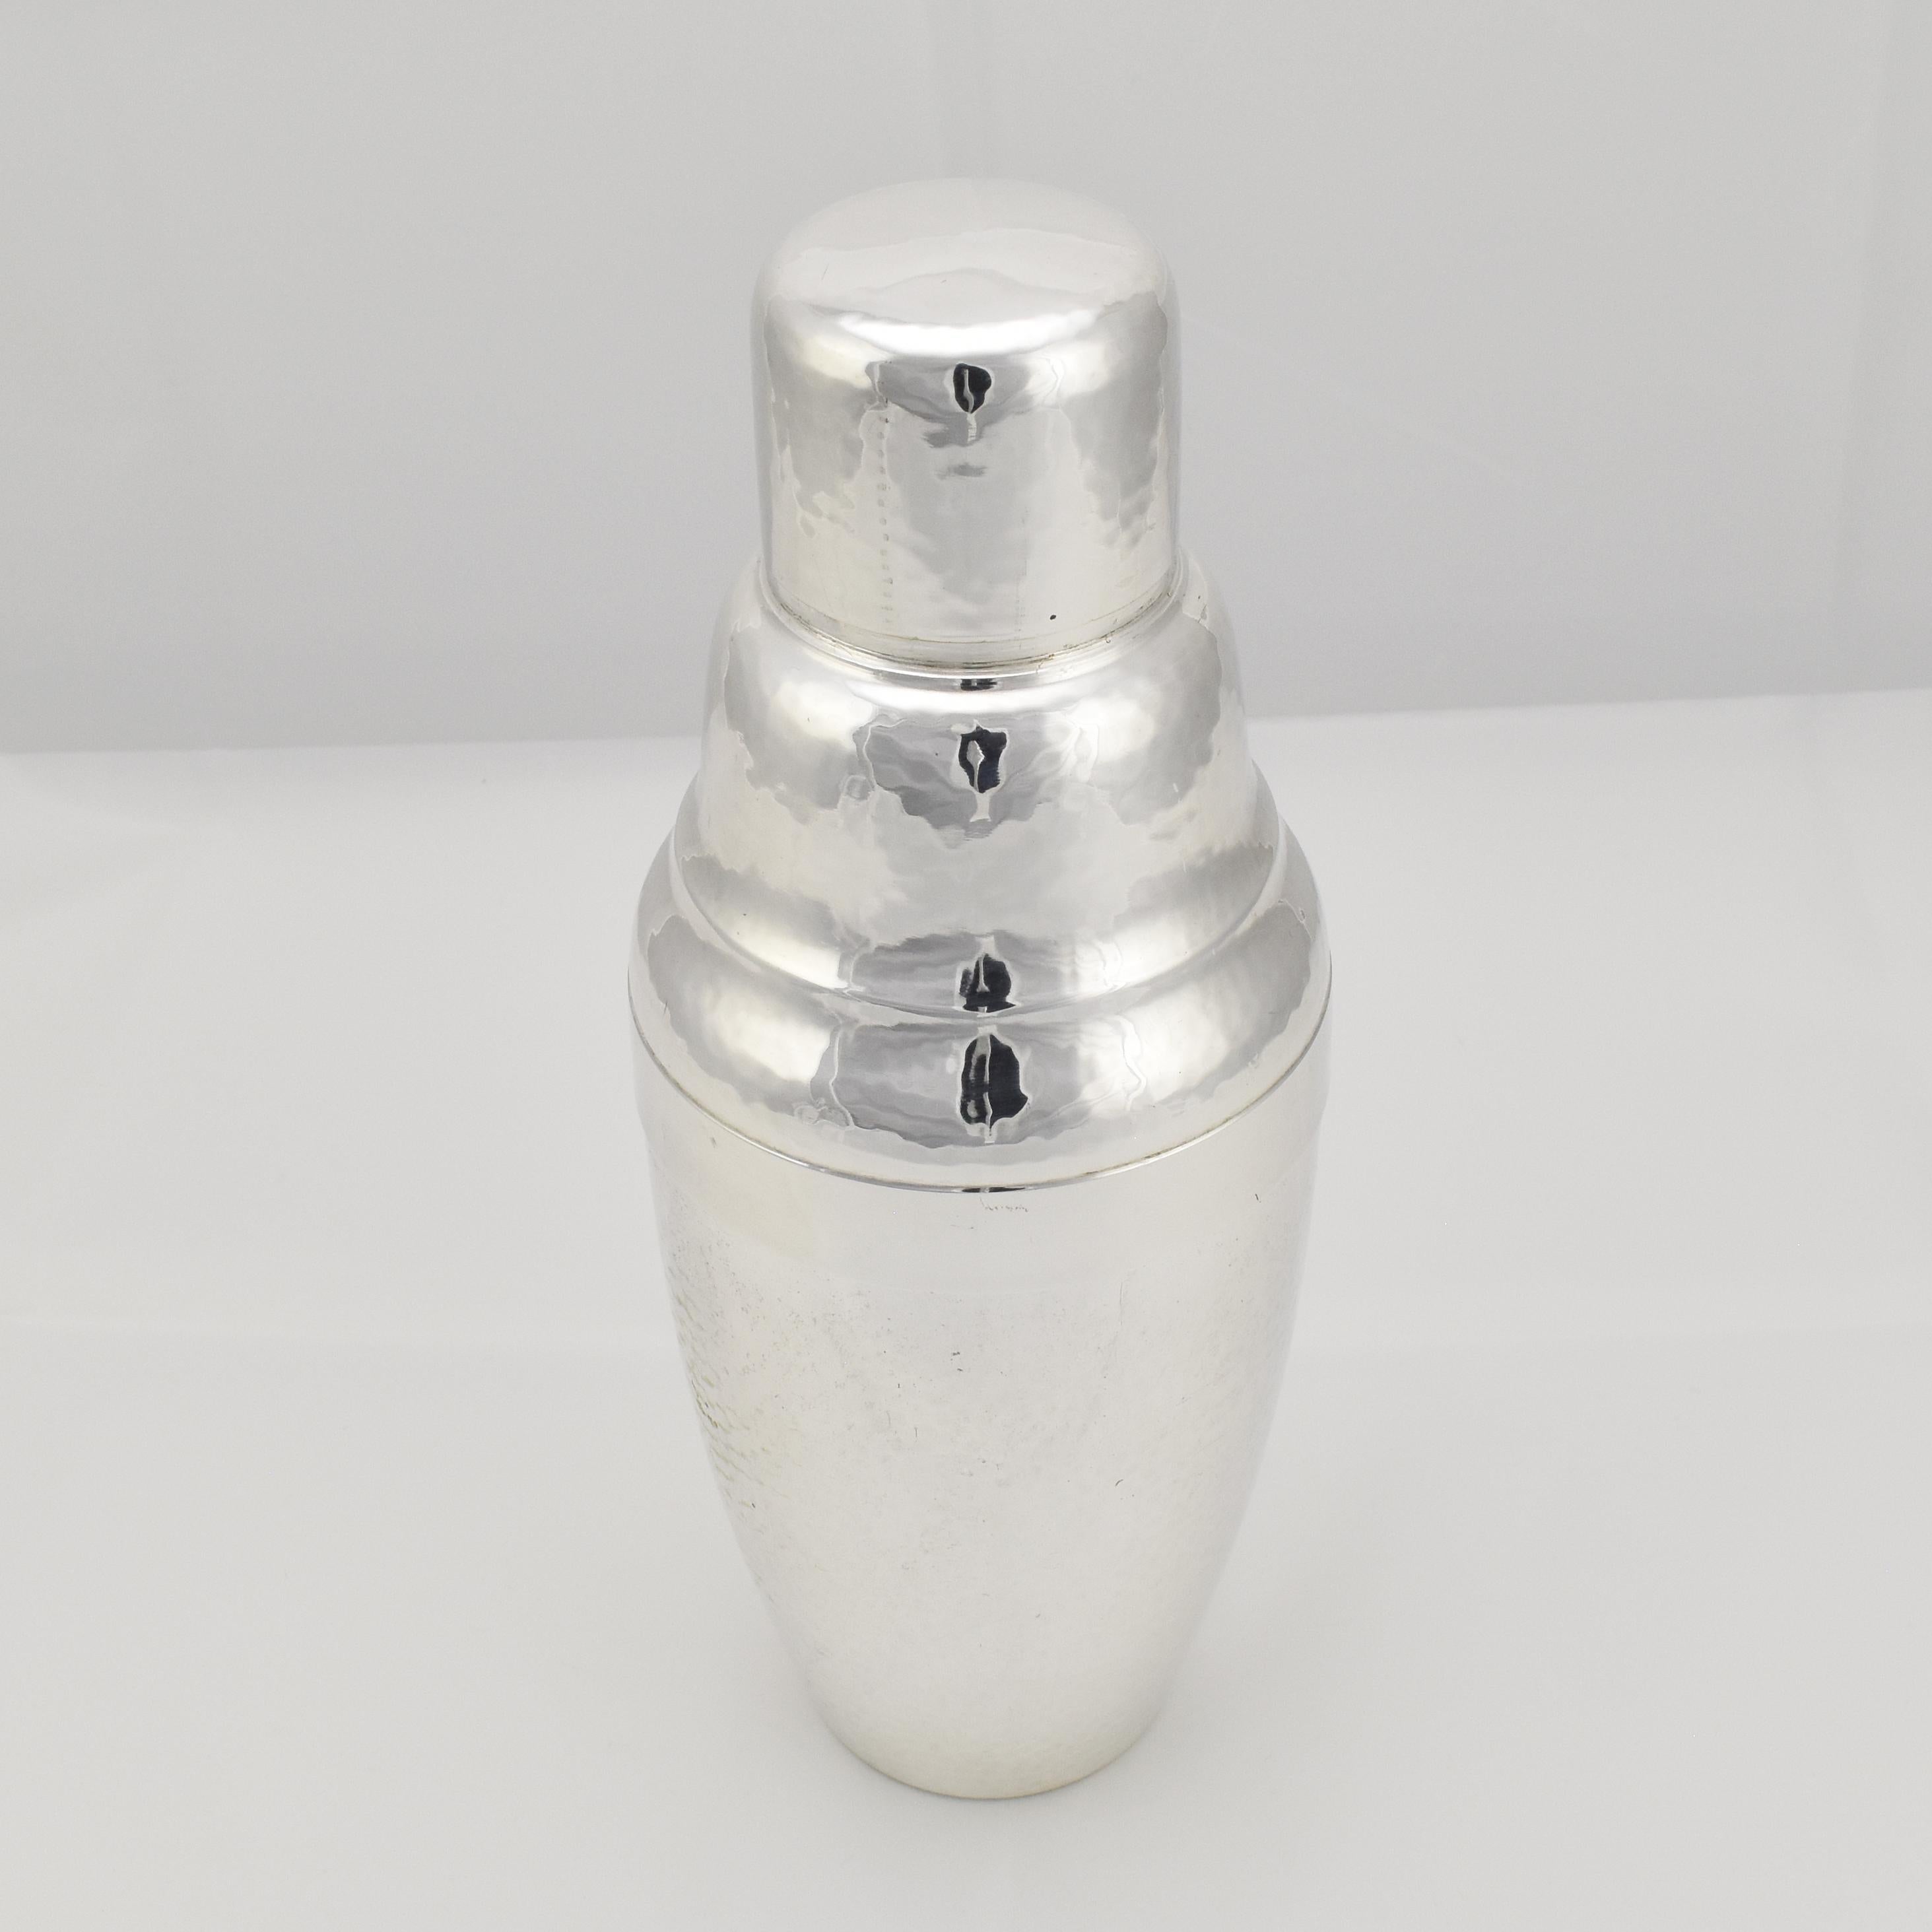 Vintage cocktail shaker with a completely handhammered surface, crafted from silverplated brass by unknown manufacturer OKE

The shape features clean lines, a curvaceous body, and a well-proportioned silhouette.

Imagine this cocktail shaker being